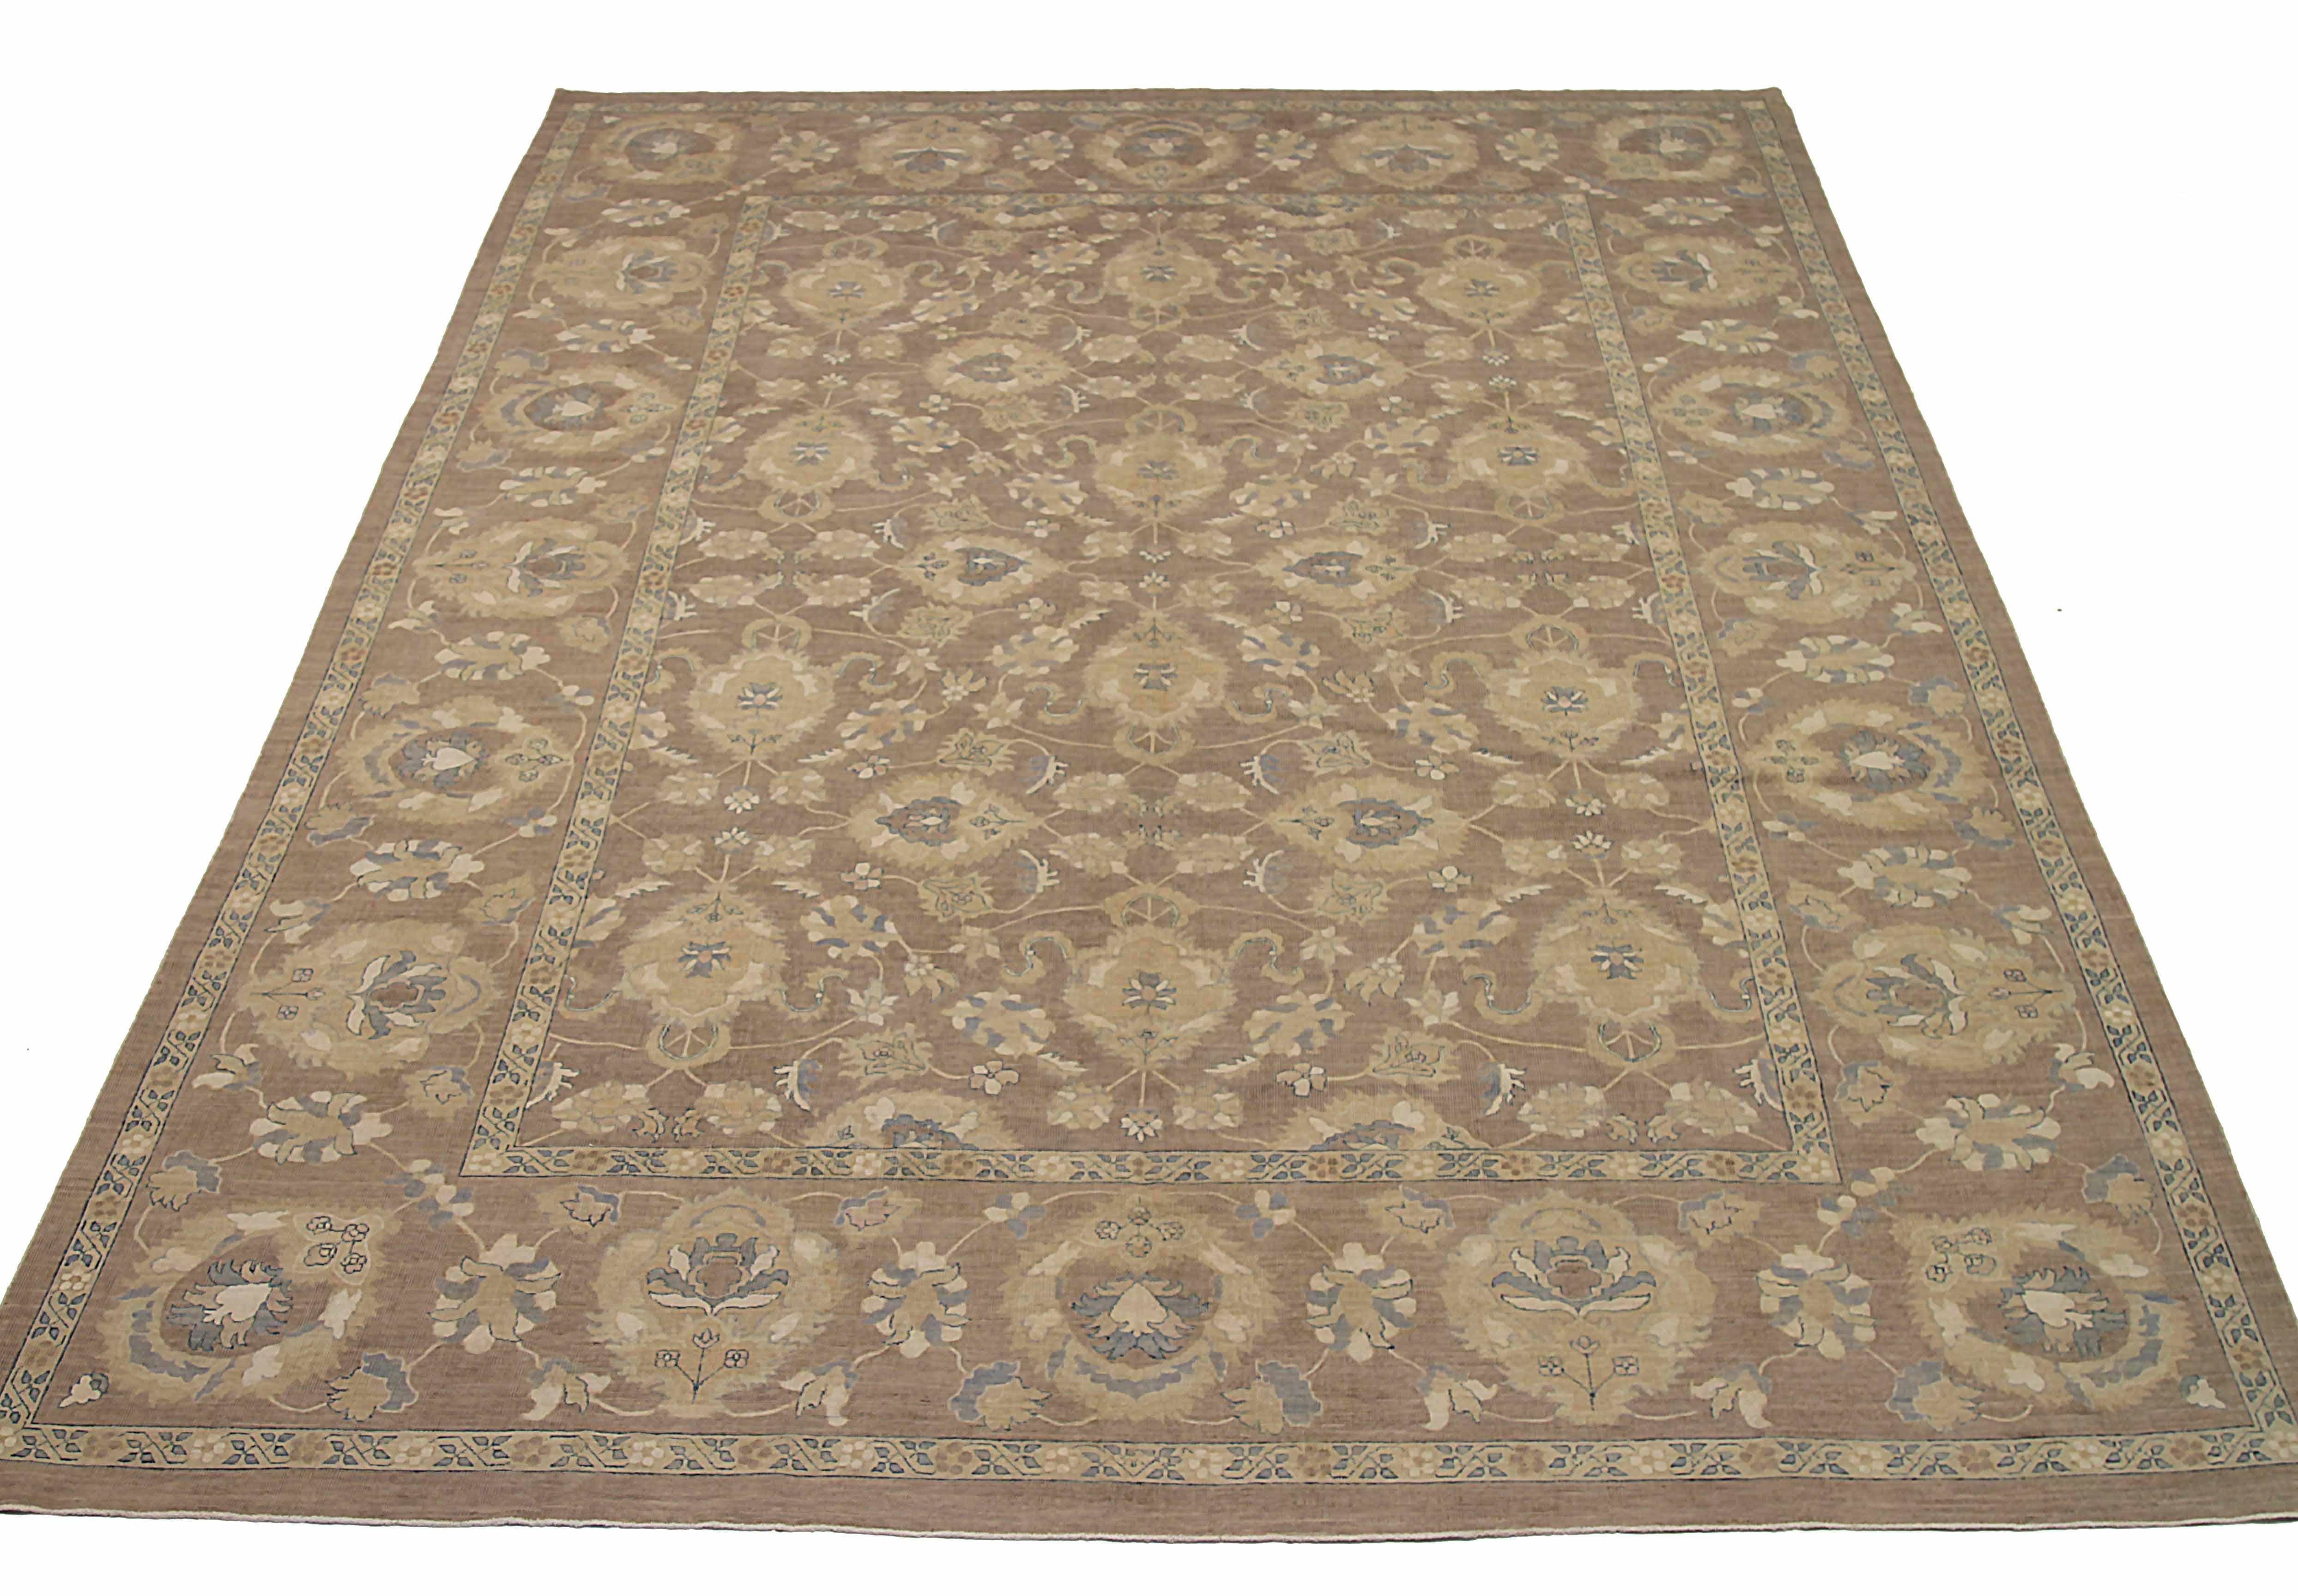 New Afghan area rug handwoven from the finest sheep’s wool. It’s colored with all-natural vegetable dyes that are safe for humans and pets. It’s a Haji Jalili design woven by expert artisans. In addition to the fine weaving, this rug underwent a